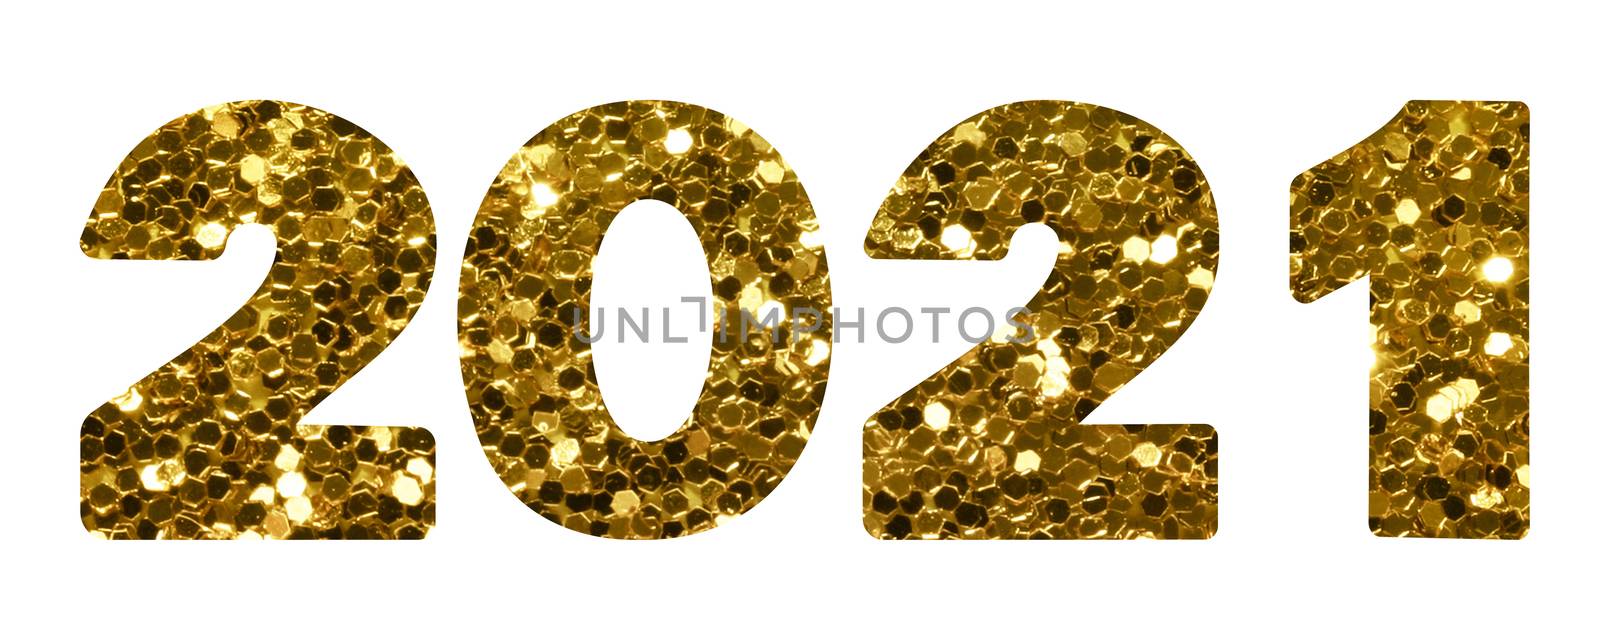 2021 gold sequin texture design template Celebration typography poster, banner or greeting card. llustration isolated on white background.